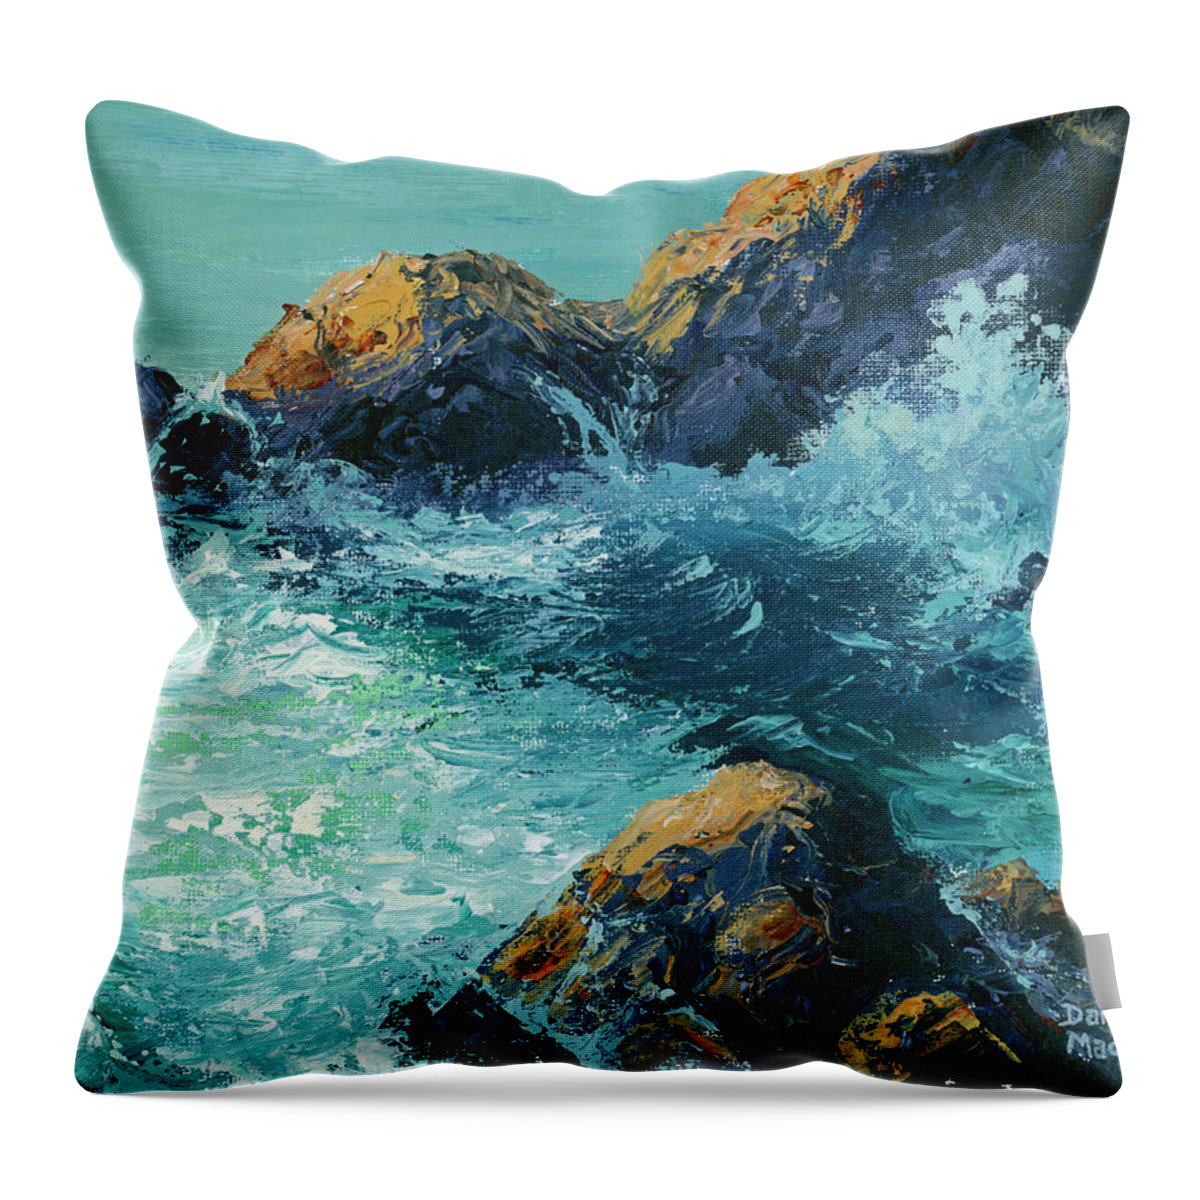 Seascape Throw Pillow featuring the painting High Tide by Darice Machel McGuire